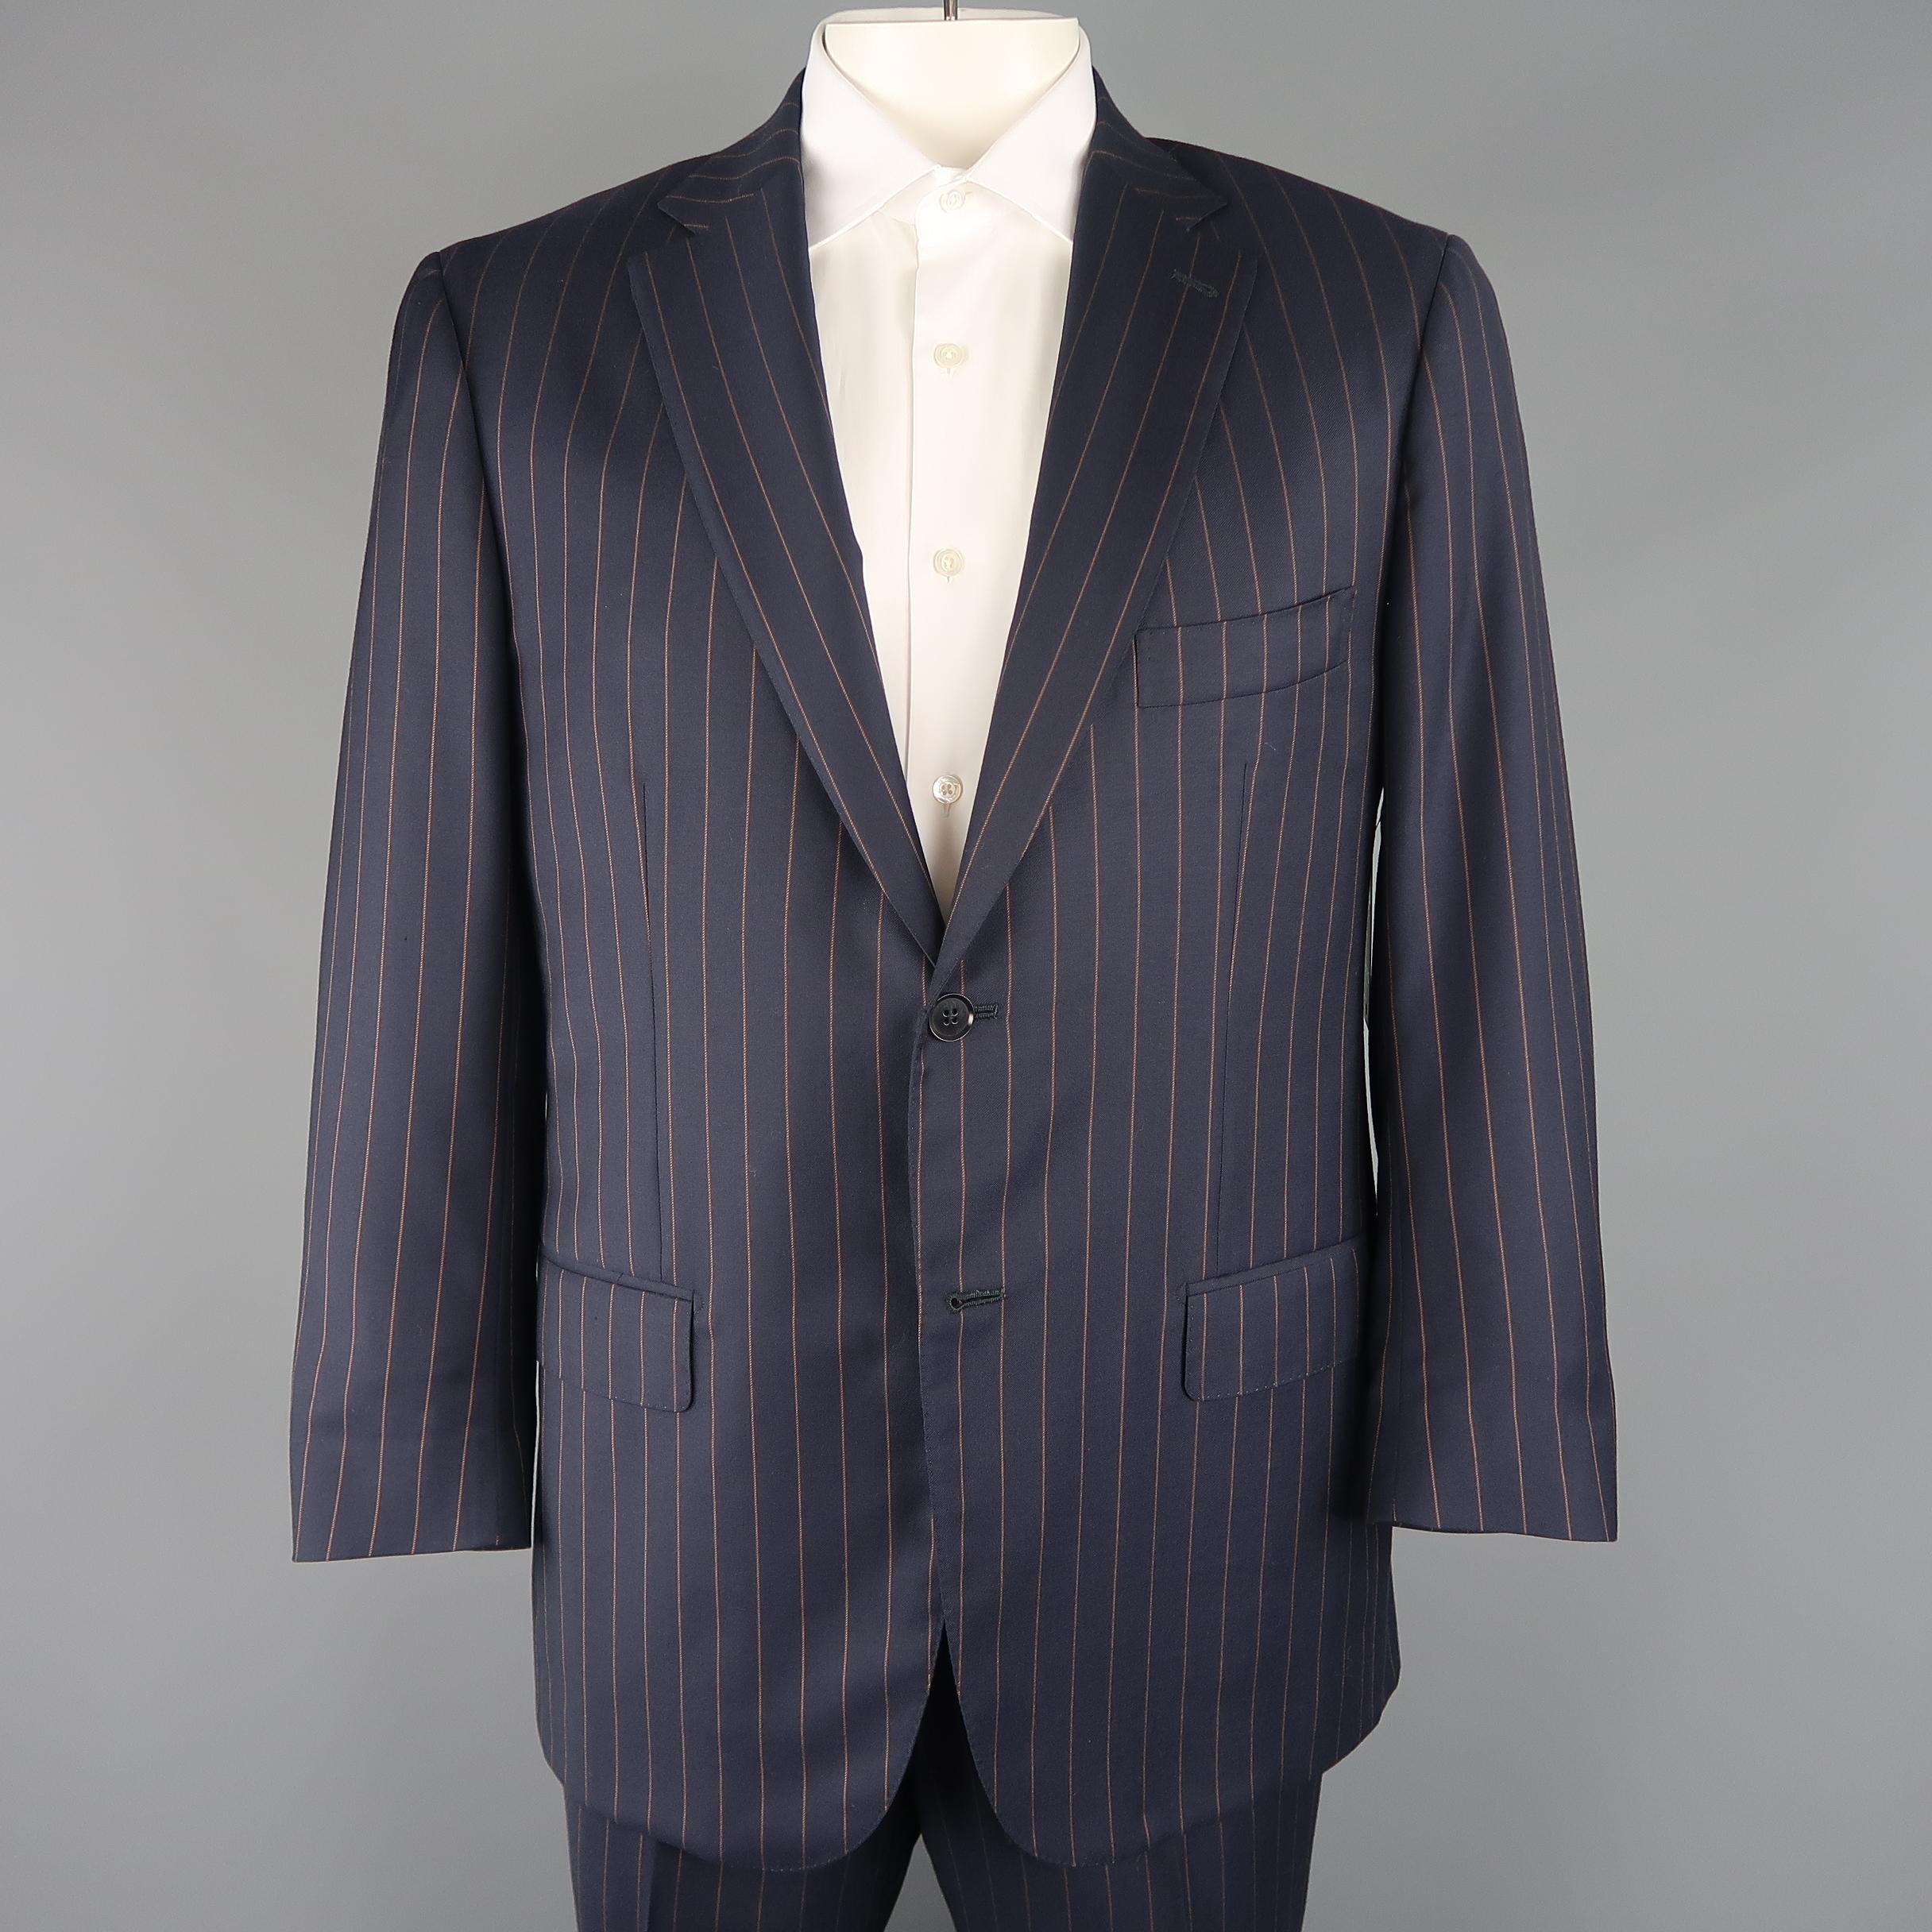 Two piece ISAIA suit comes in navy wool twill with a tan chalk strip throughout and includes a single breasted, two button sport coat with a notch lapel and matching flat front trousers.  Made in Italy.
 
Excellent Pre-Owned Condition.
Marked: IT